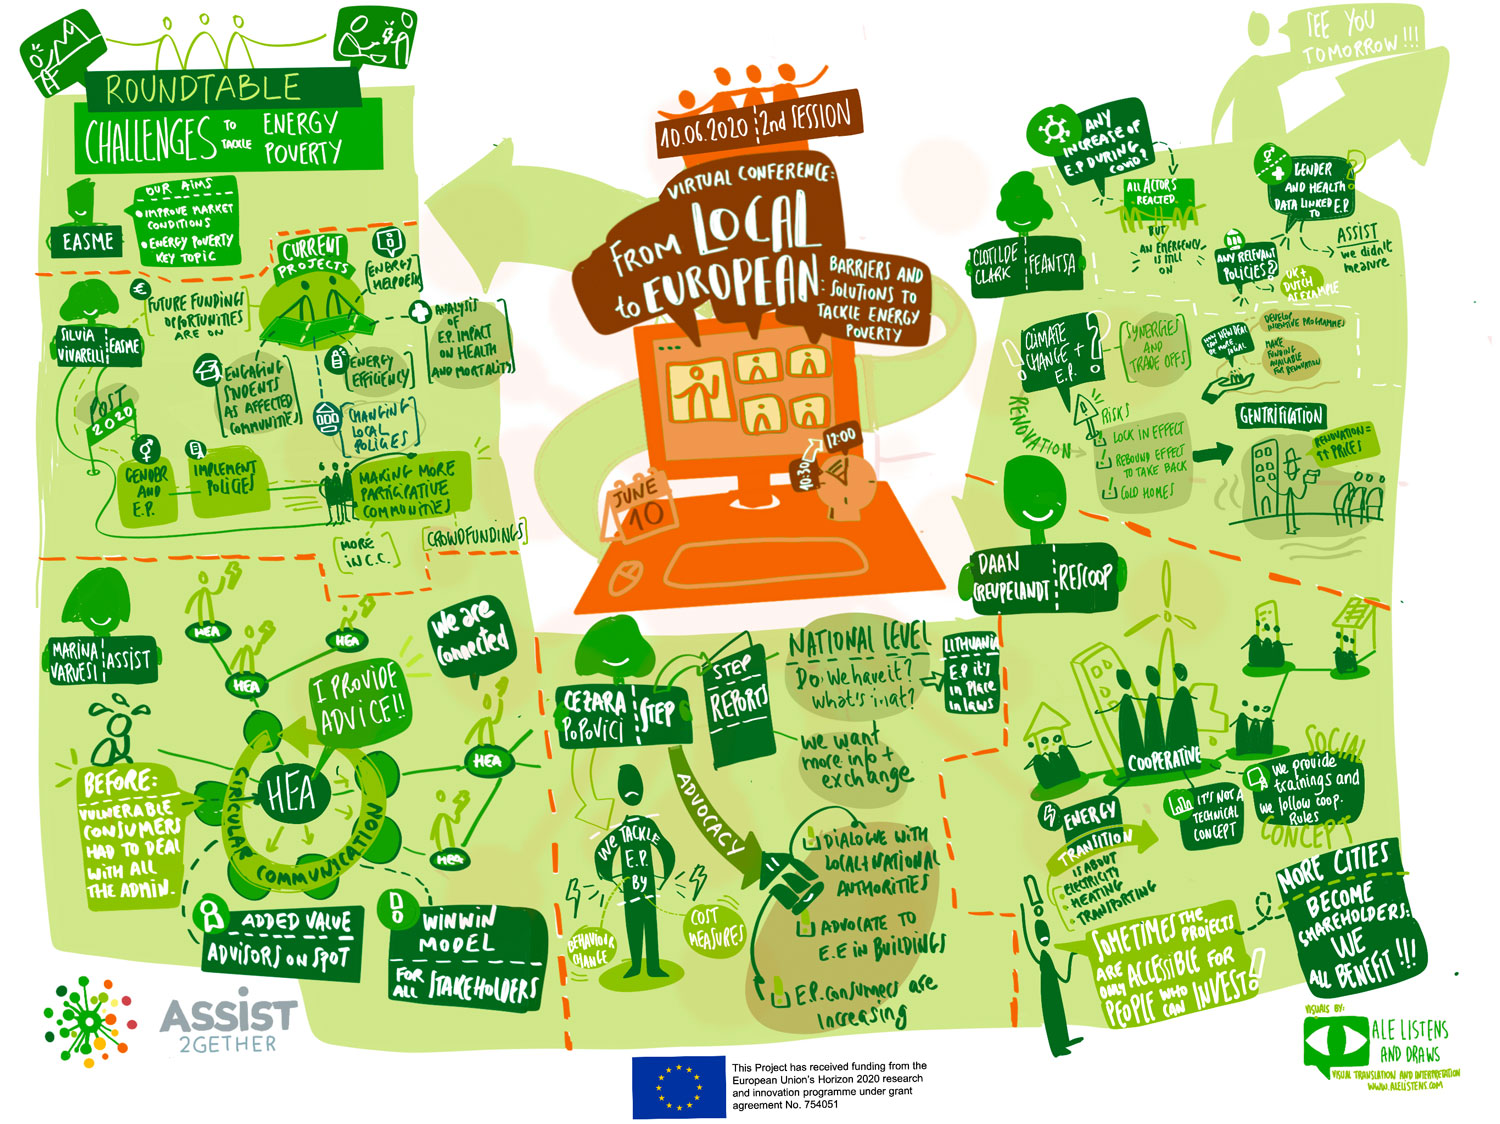 Ecoserveis: Assist Together Project – Final Conference; From Local To European: Barriers And Solutions To Tackle Energy Poverty